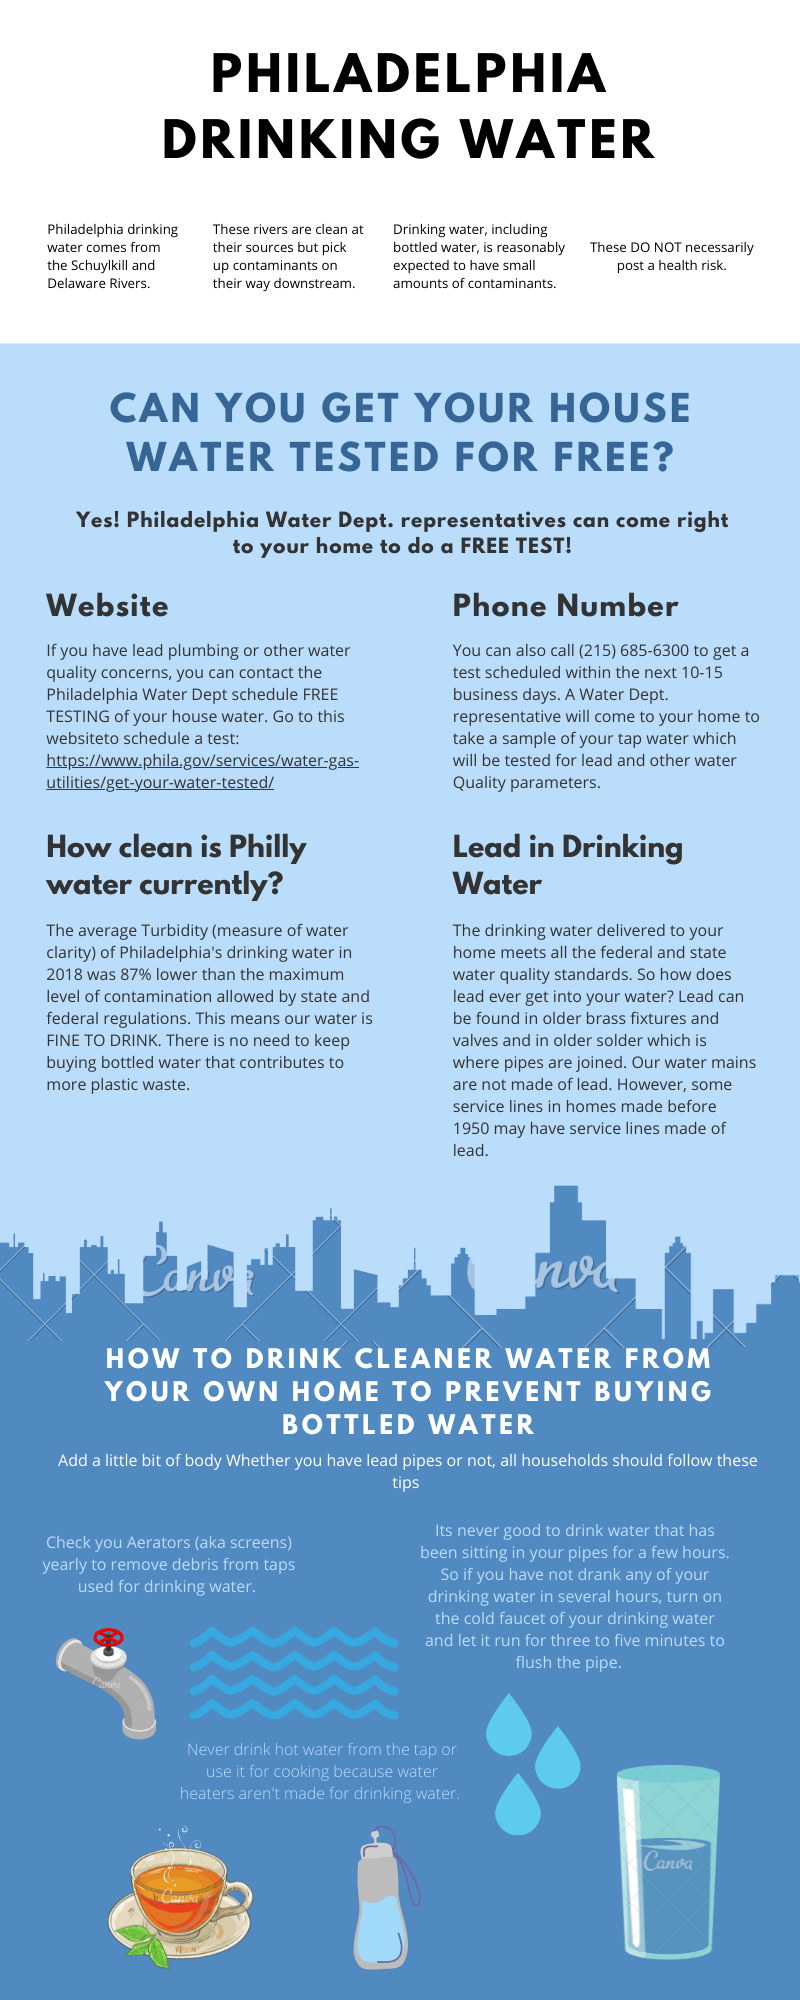 Student Mia Zaia, who worked with the Climate and Sustainability Working Group through Drexel Community Scholars, designed this infographic for the Lindy Center to promote less bottled water use.